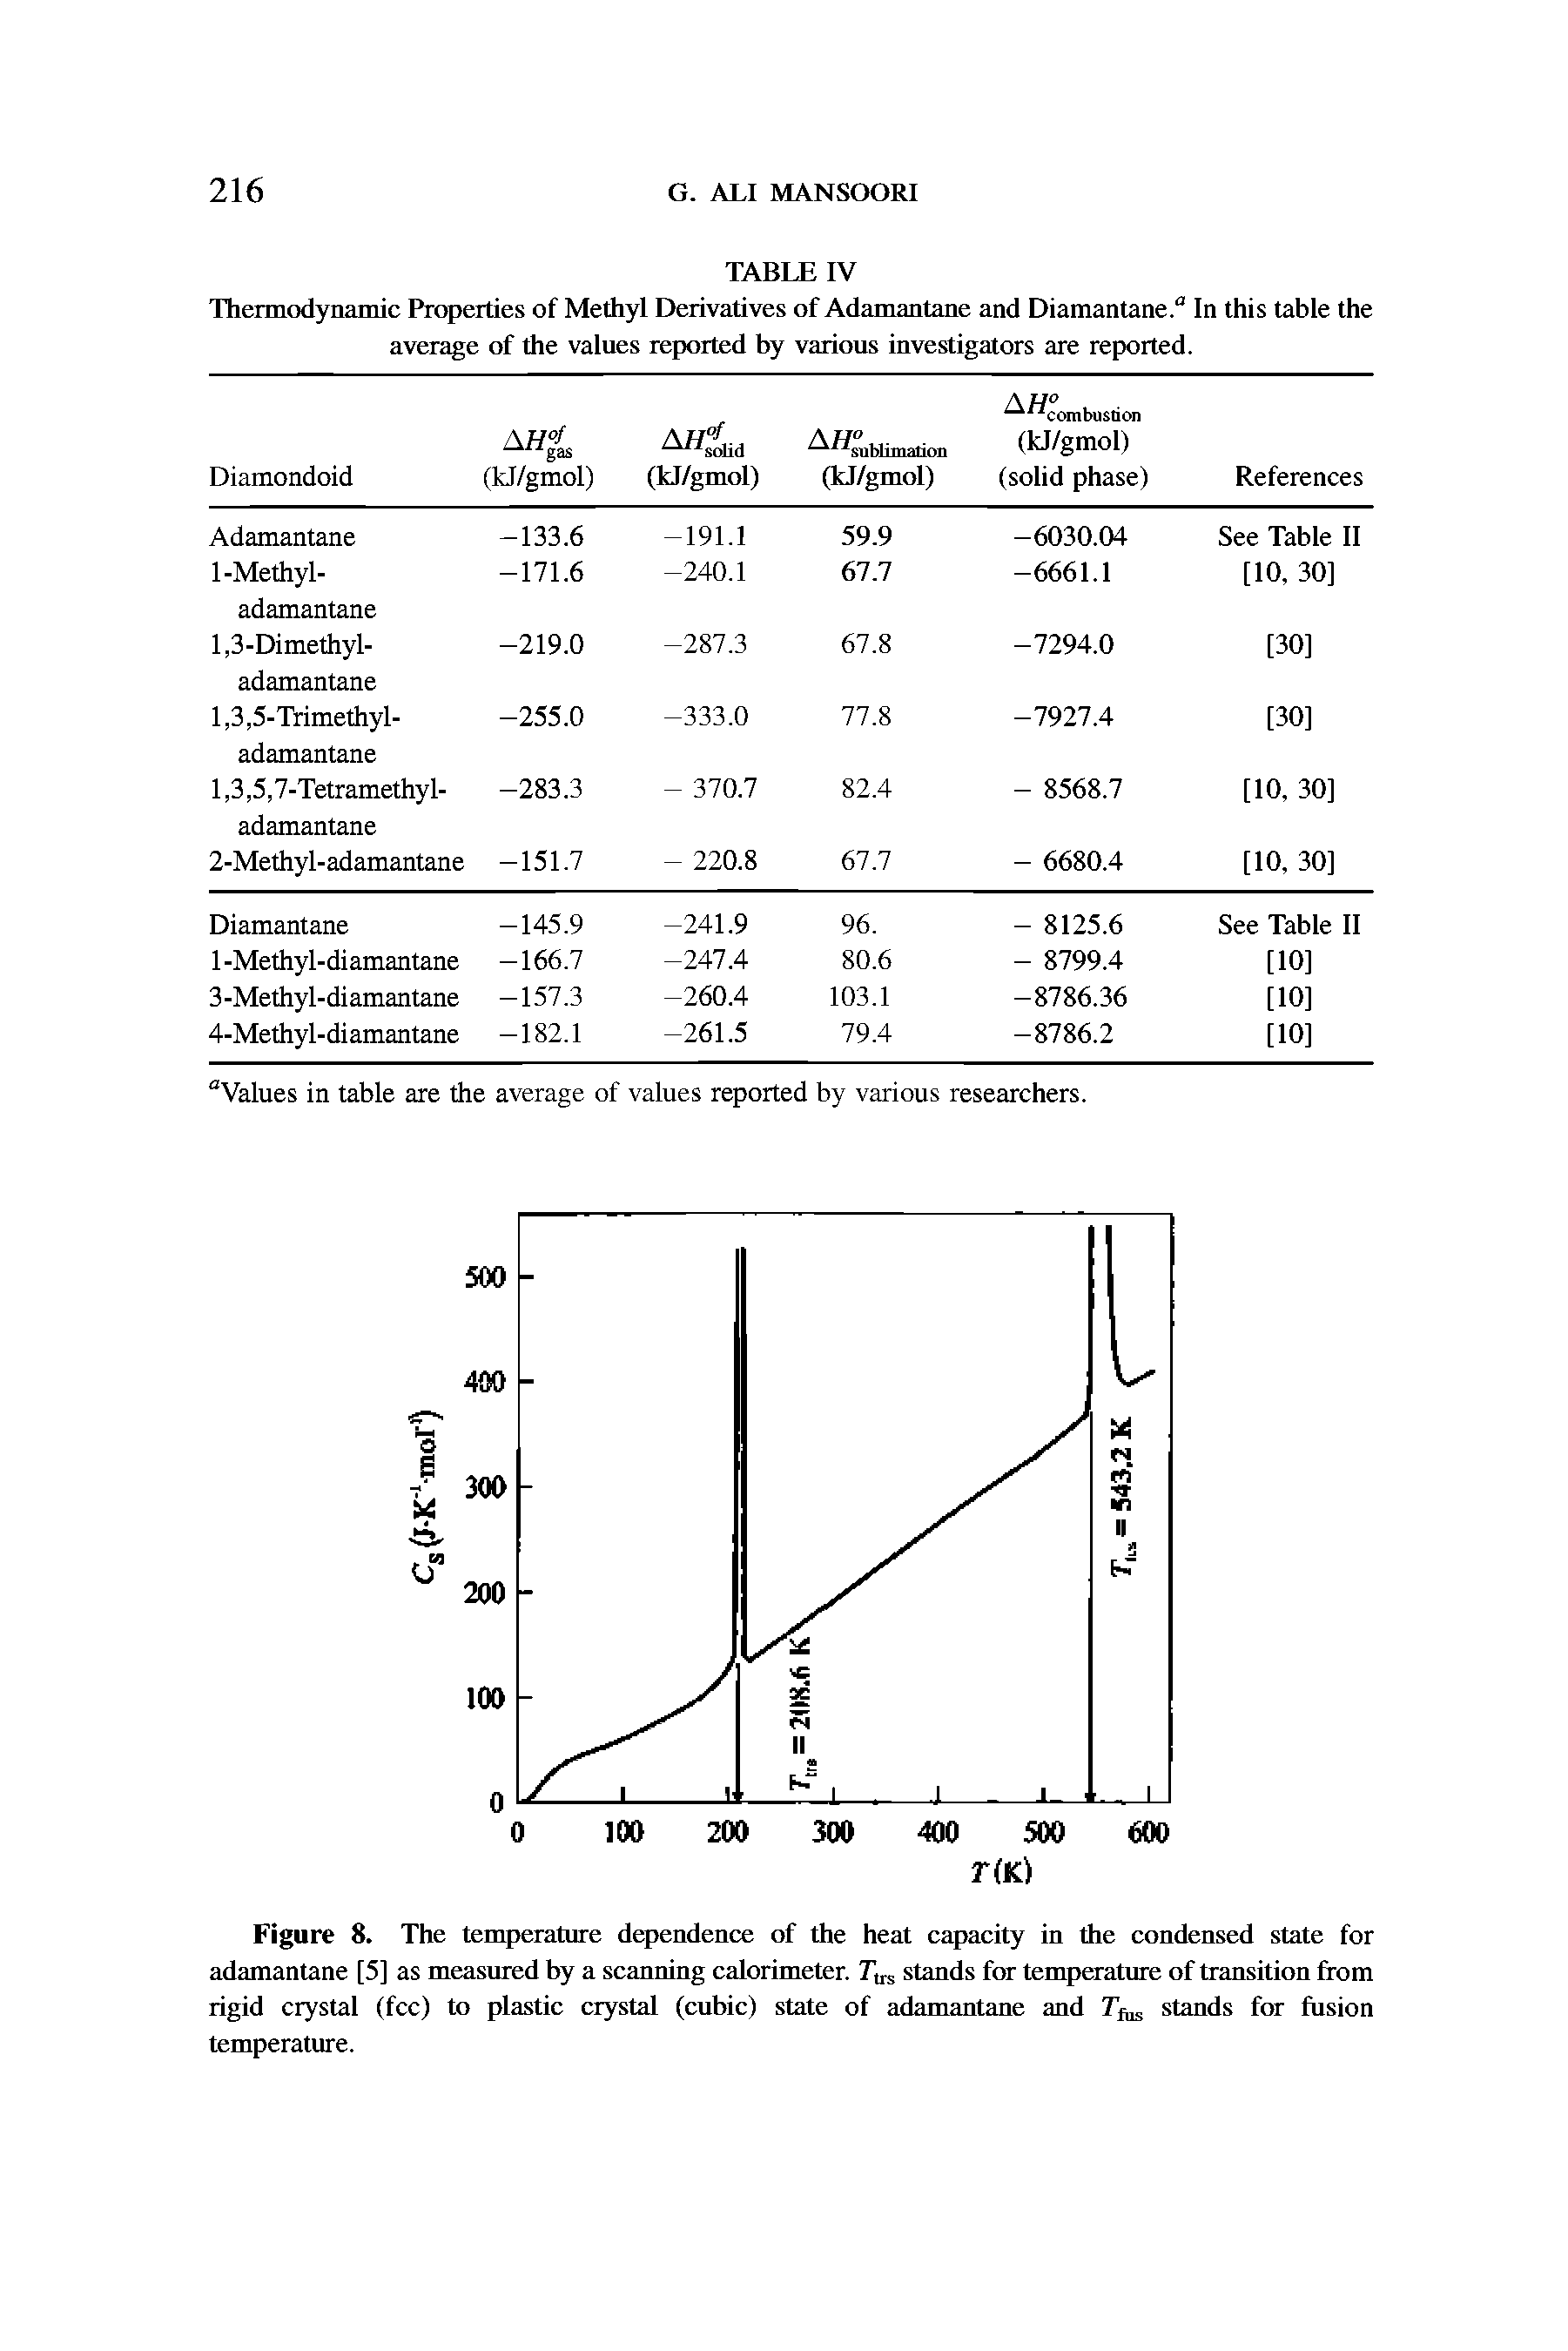 Figure 8. The temperature dependence of the heat capacity in the condensed state for adamantane [5] as measured by a scanning calorimeter. Tu, stands for temperature of transition from rigid crystal (fee) to plastic crystal (cubic) state of adamantane and Tfas stands for fusion temperature.